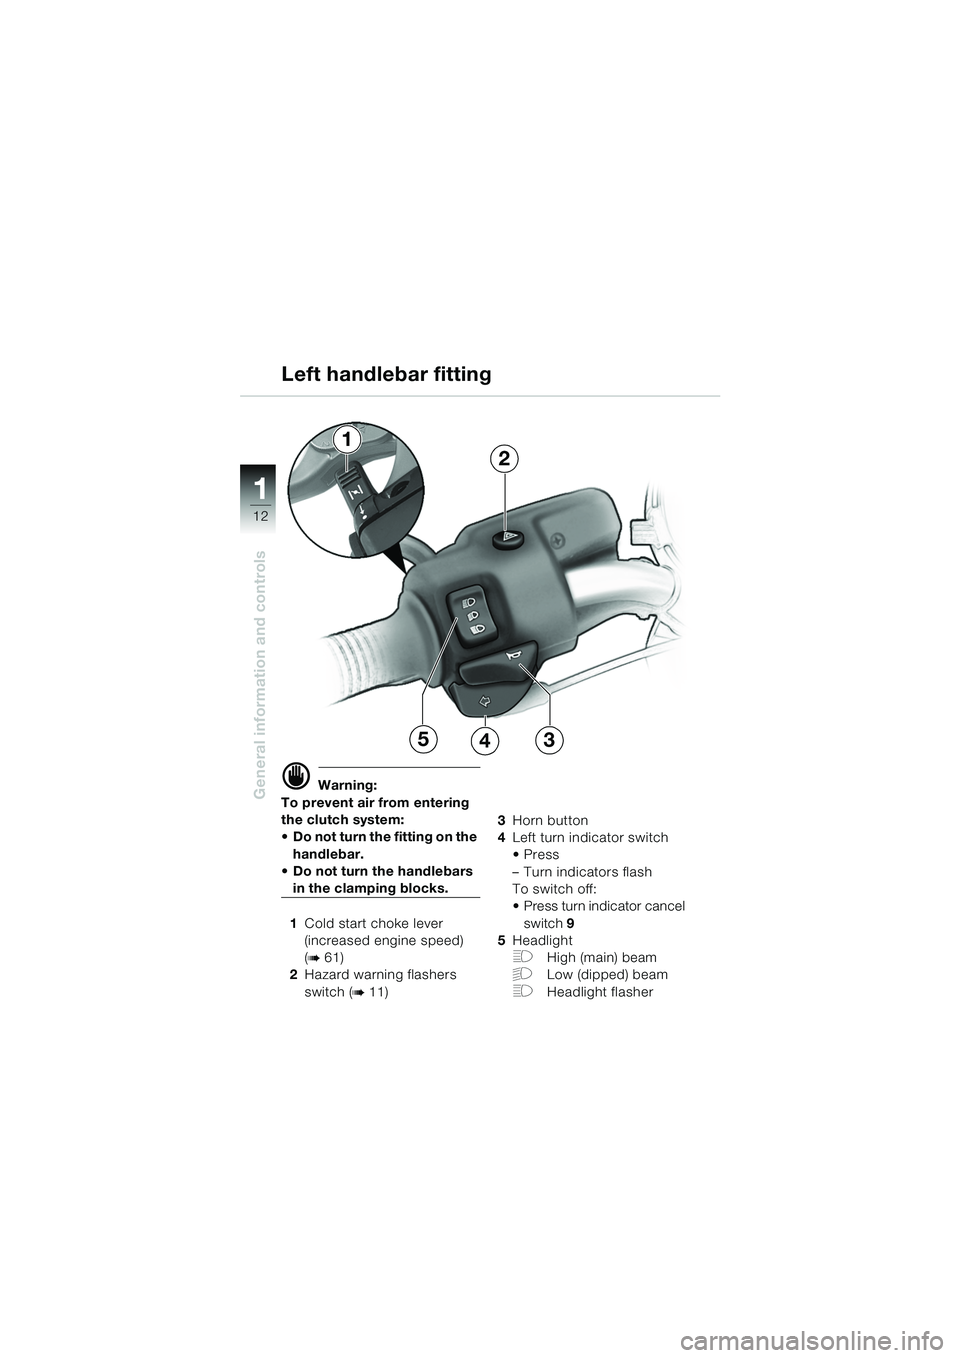 BMW MOTORRAD R 850 R 2004  Riders Manual (in English) 1
General information and controls
12
1
2
534
d Warning:
To prevent air from entering 
the clutch system: 
 Do not turn the fitting on the  handlebar.
 Do not turn the handlebars 
in the clamping bl